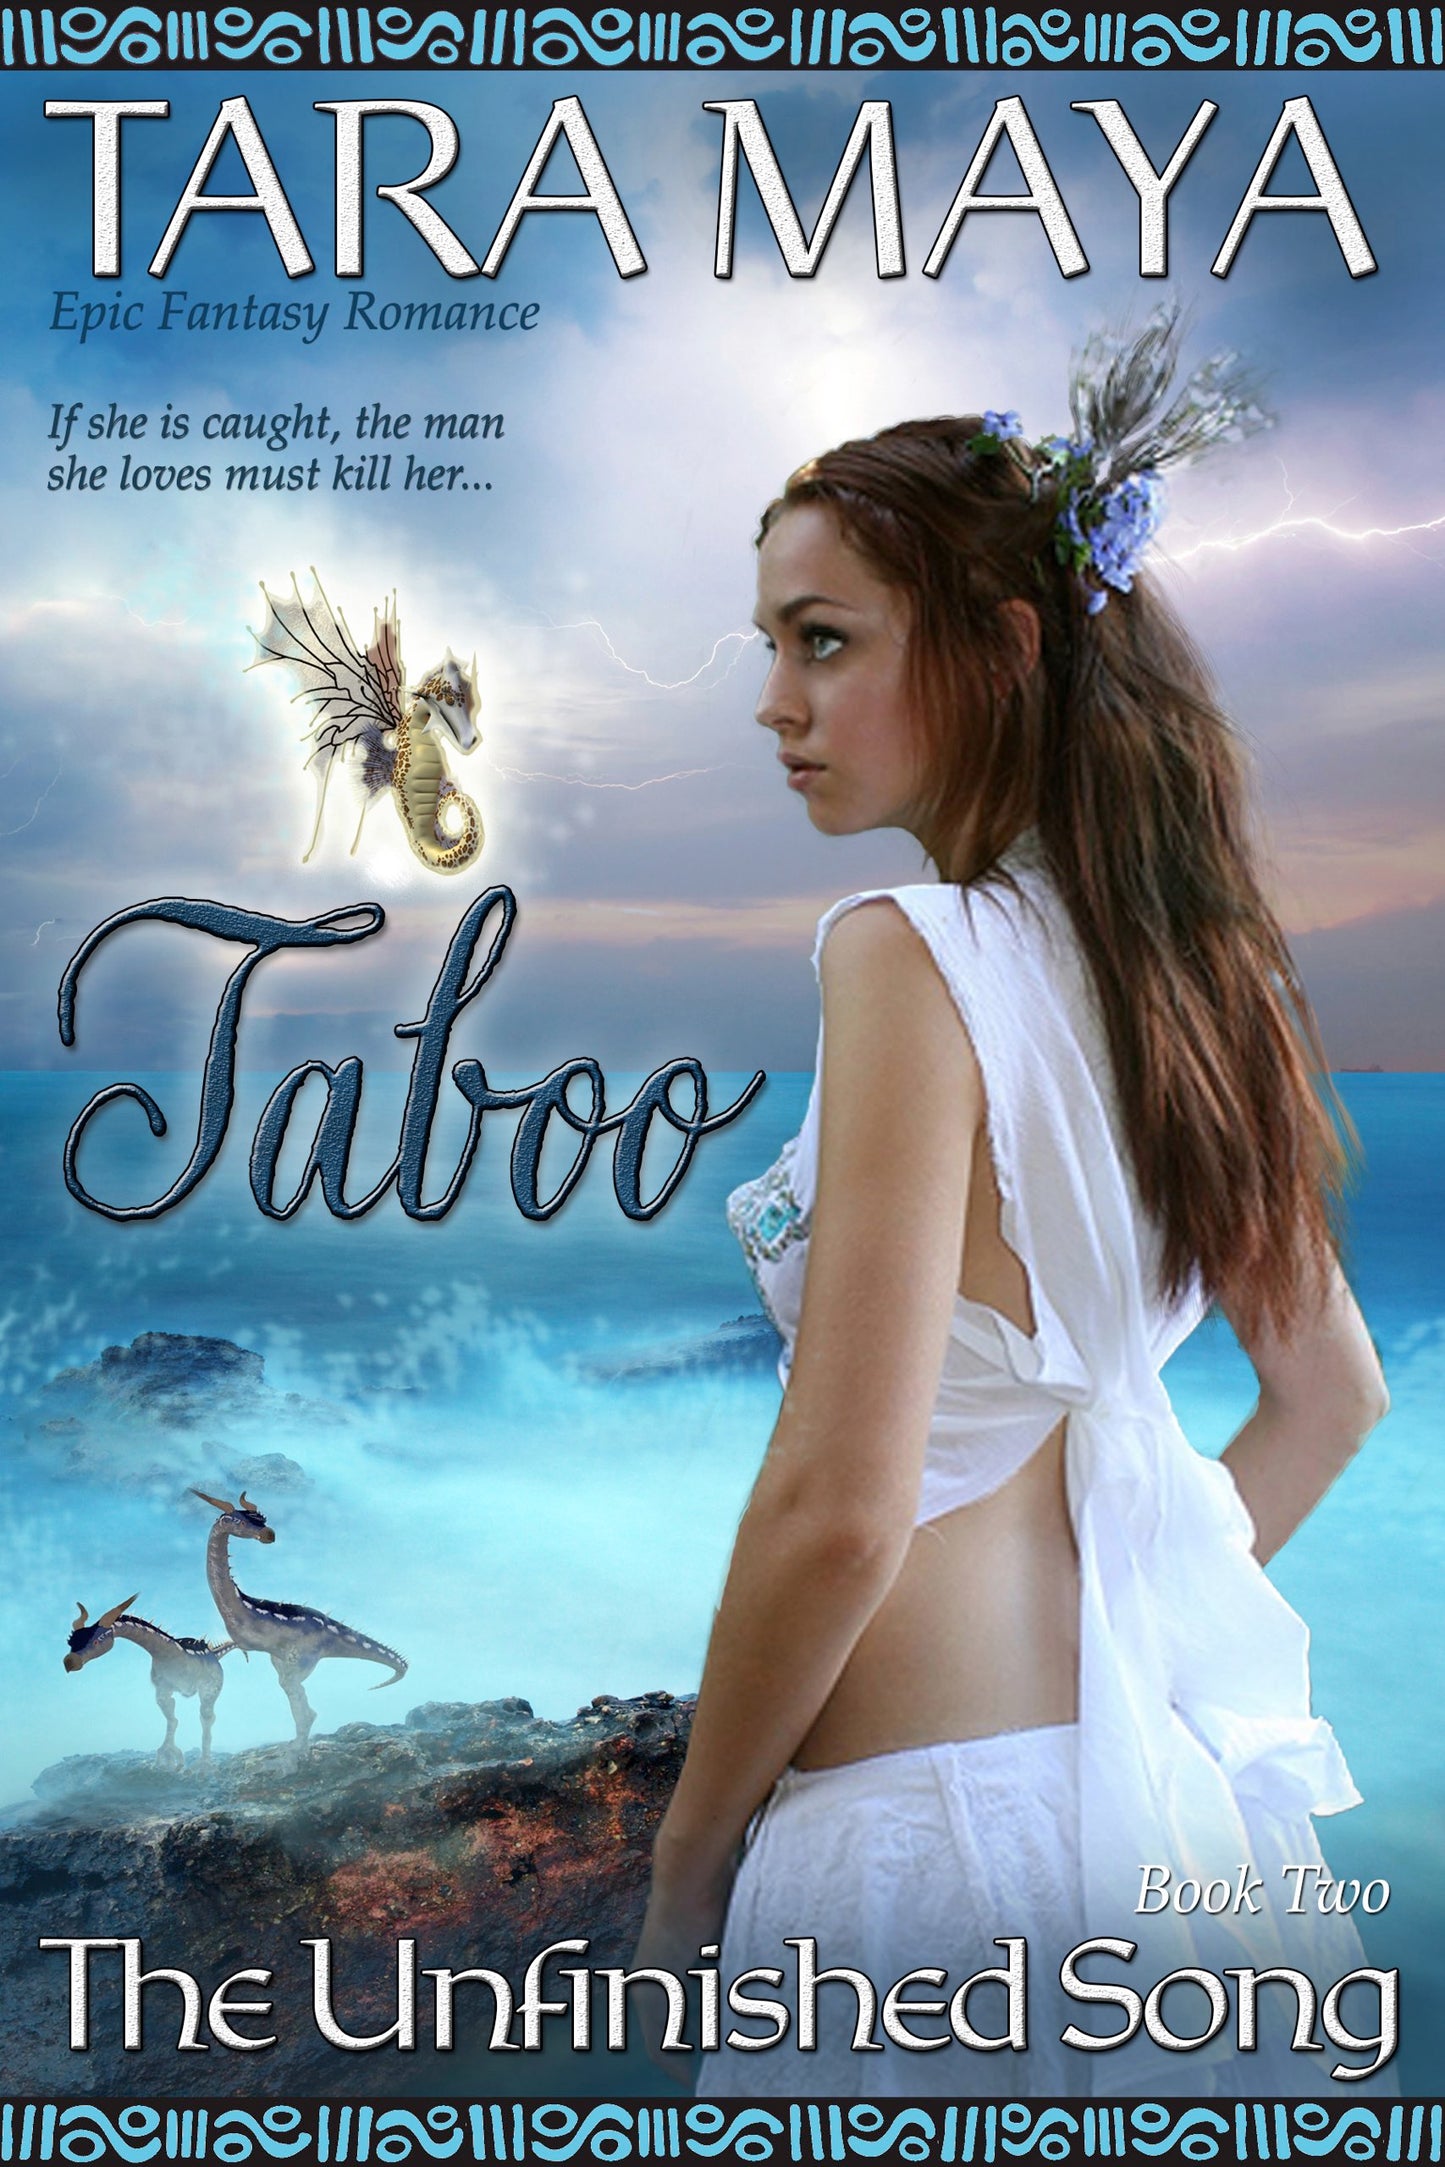 The Unfinished Song, Book  2 - Taboo